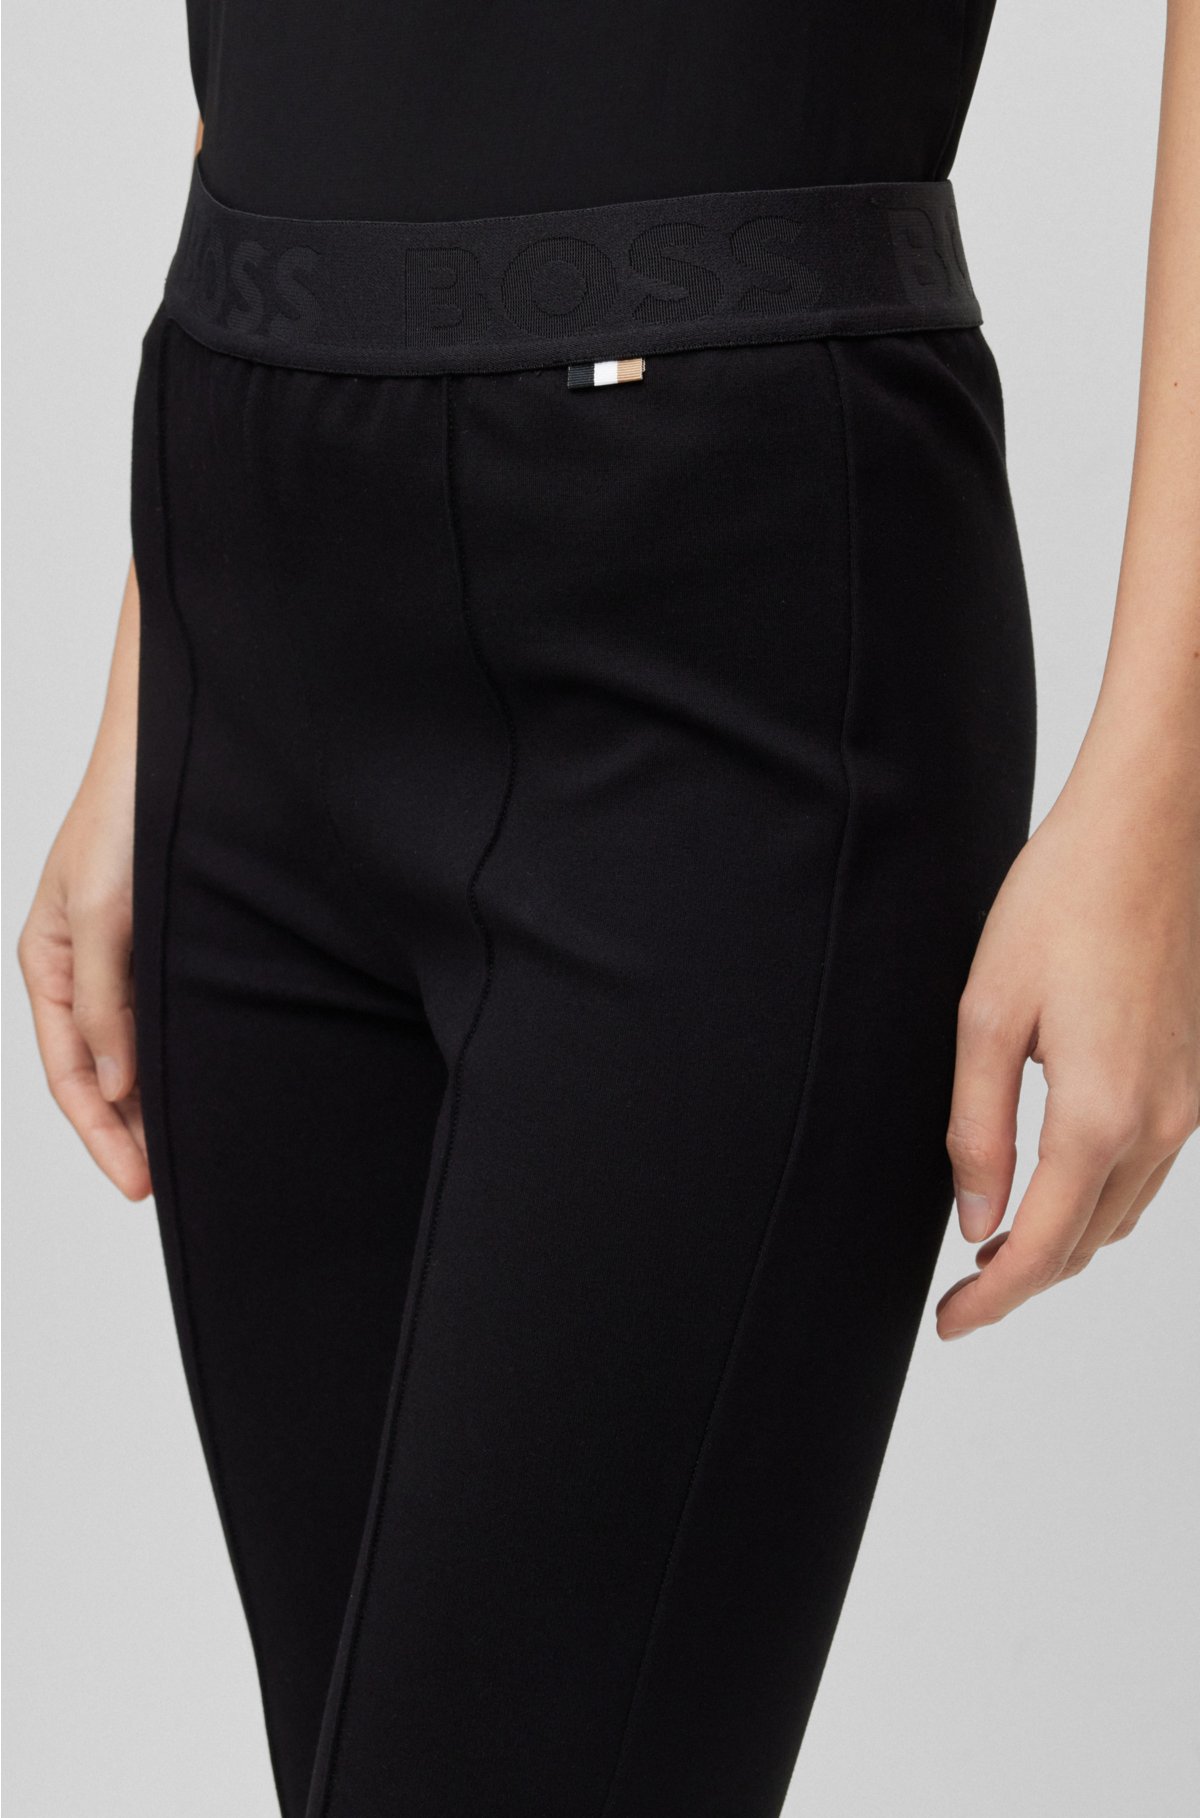 BOSS - Slim-fit leggings in stretch jersey with logo waistband